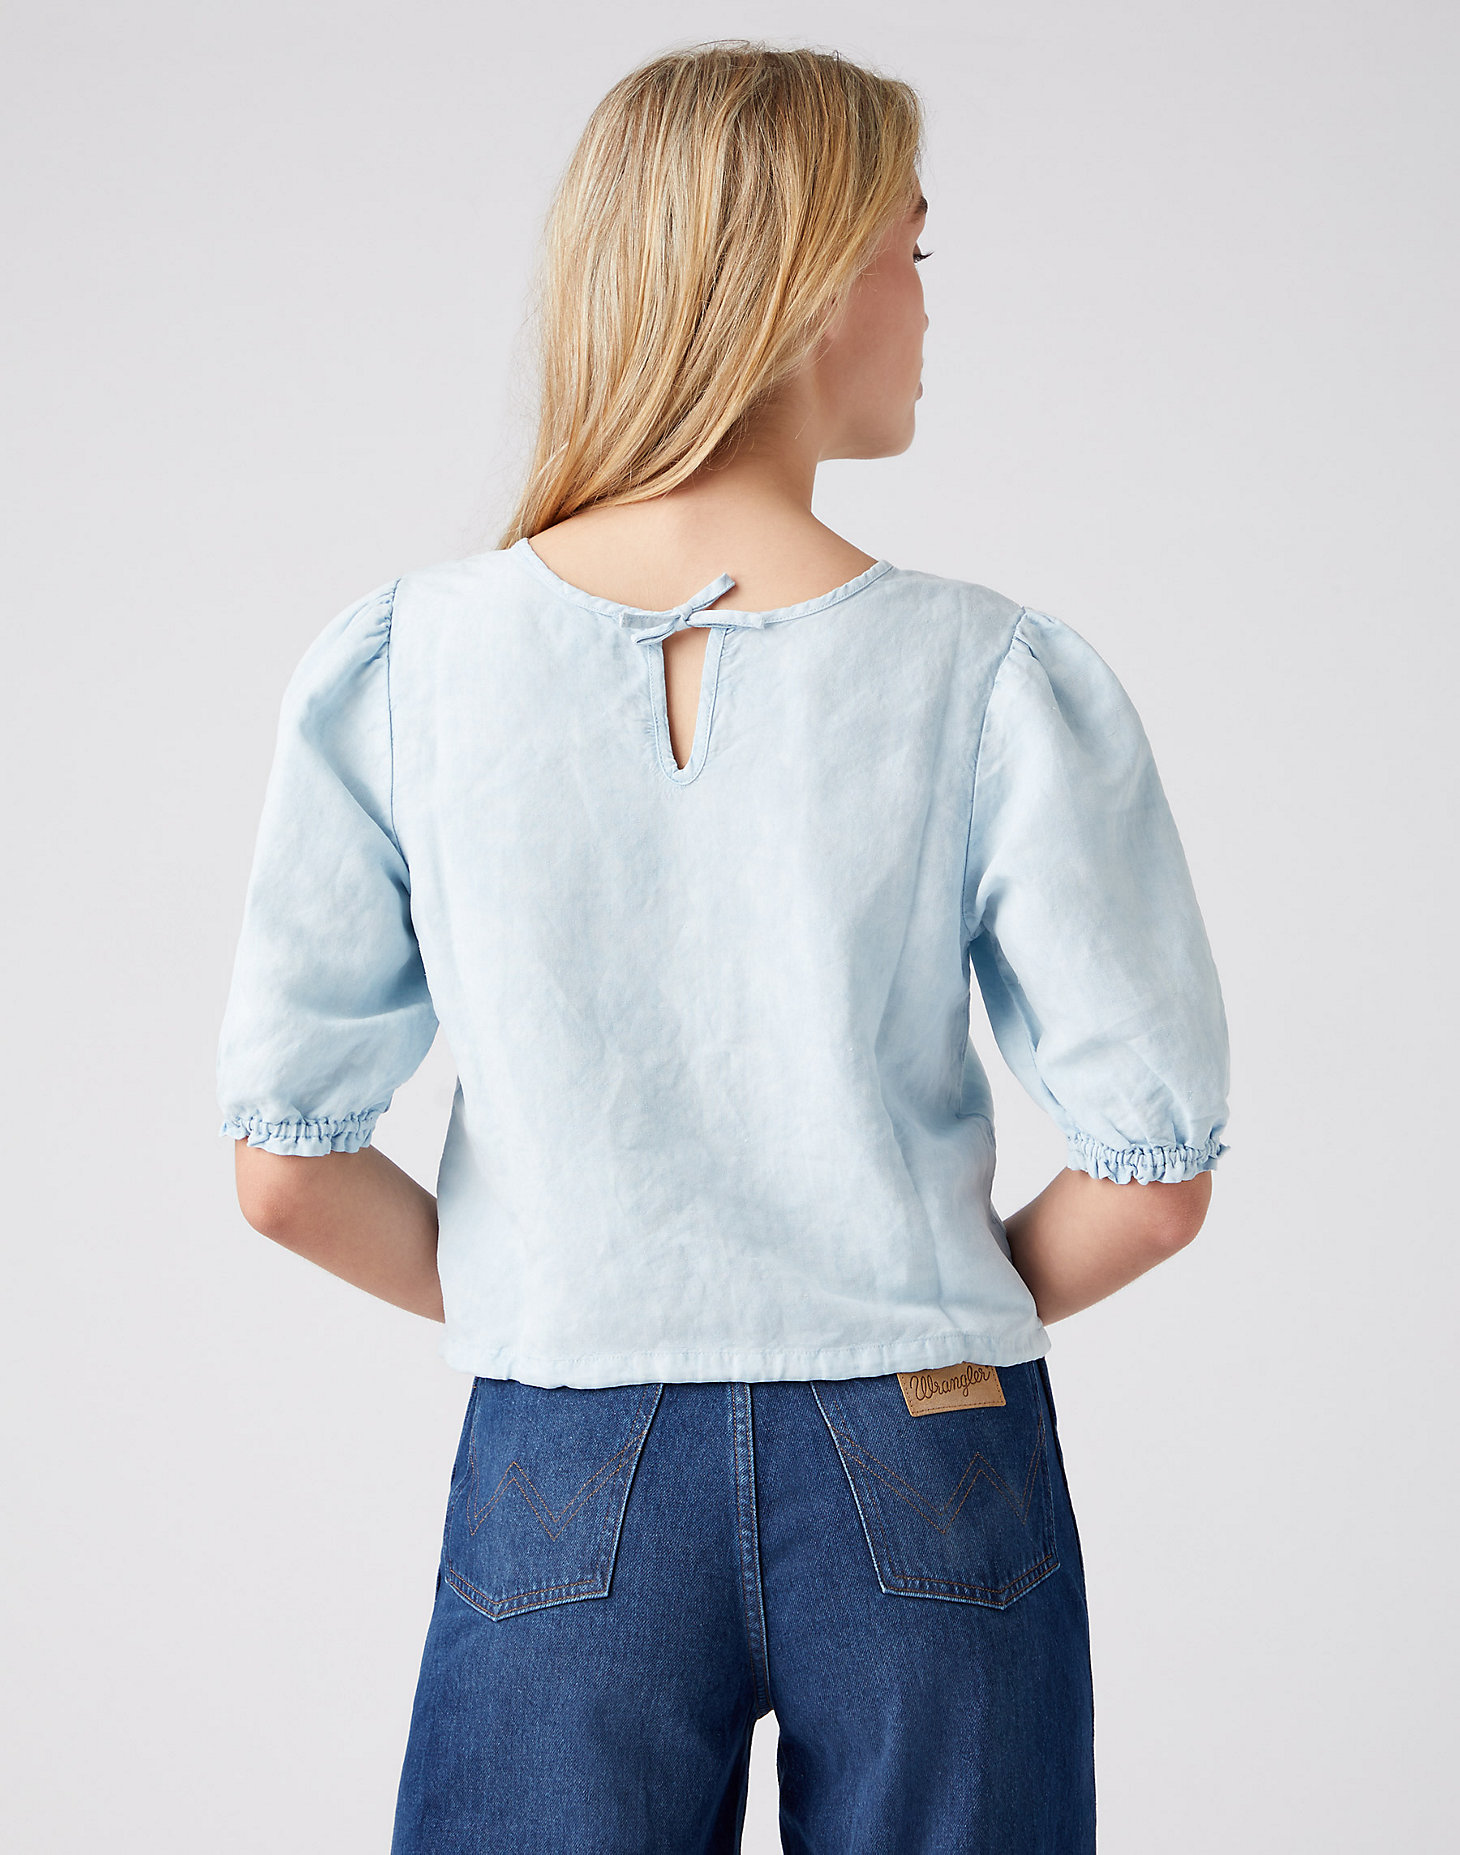 Puff Sleeve Shirt in Omphalodes Blue alternative view 2